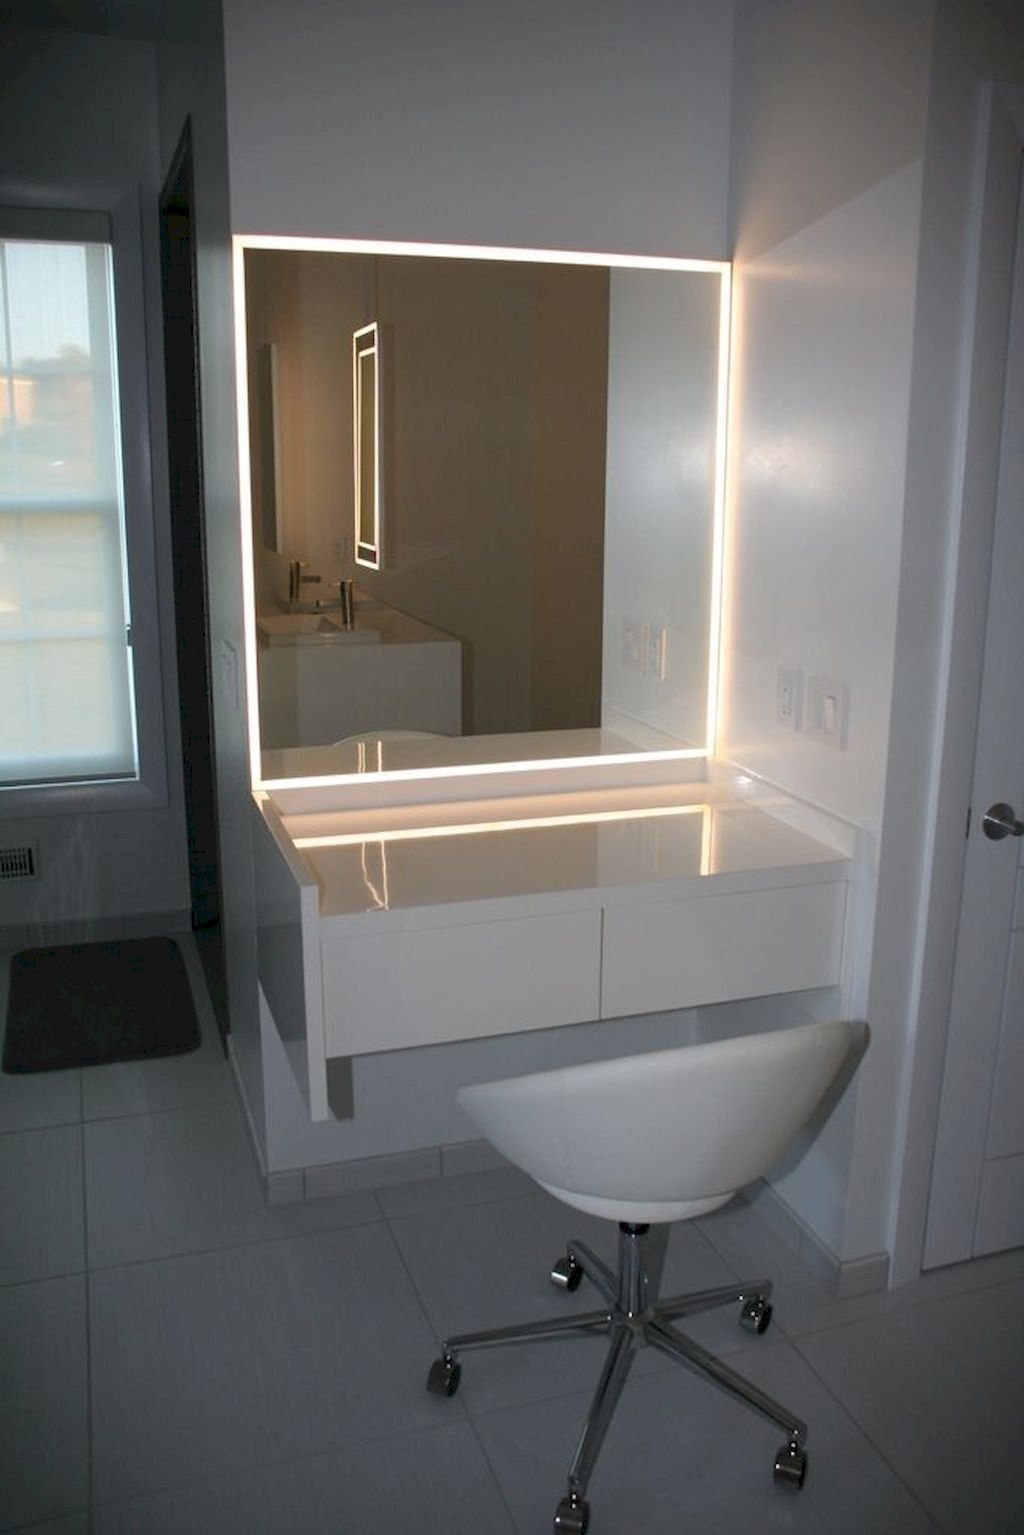 Dressing Table Mirror With Lights, Led Lights For Dresser